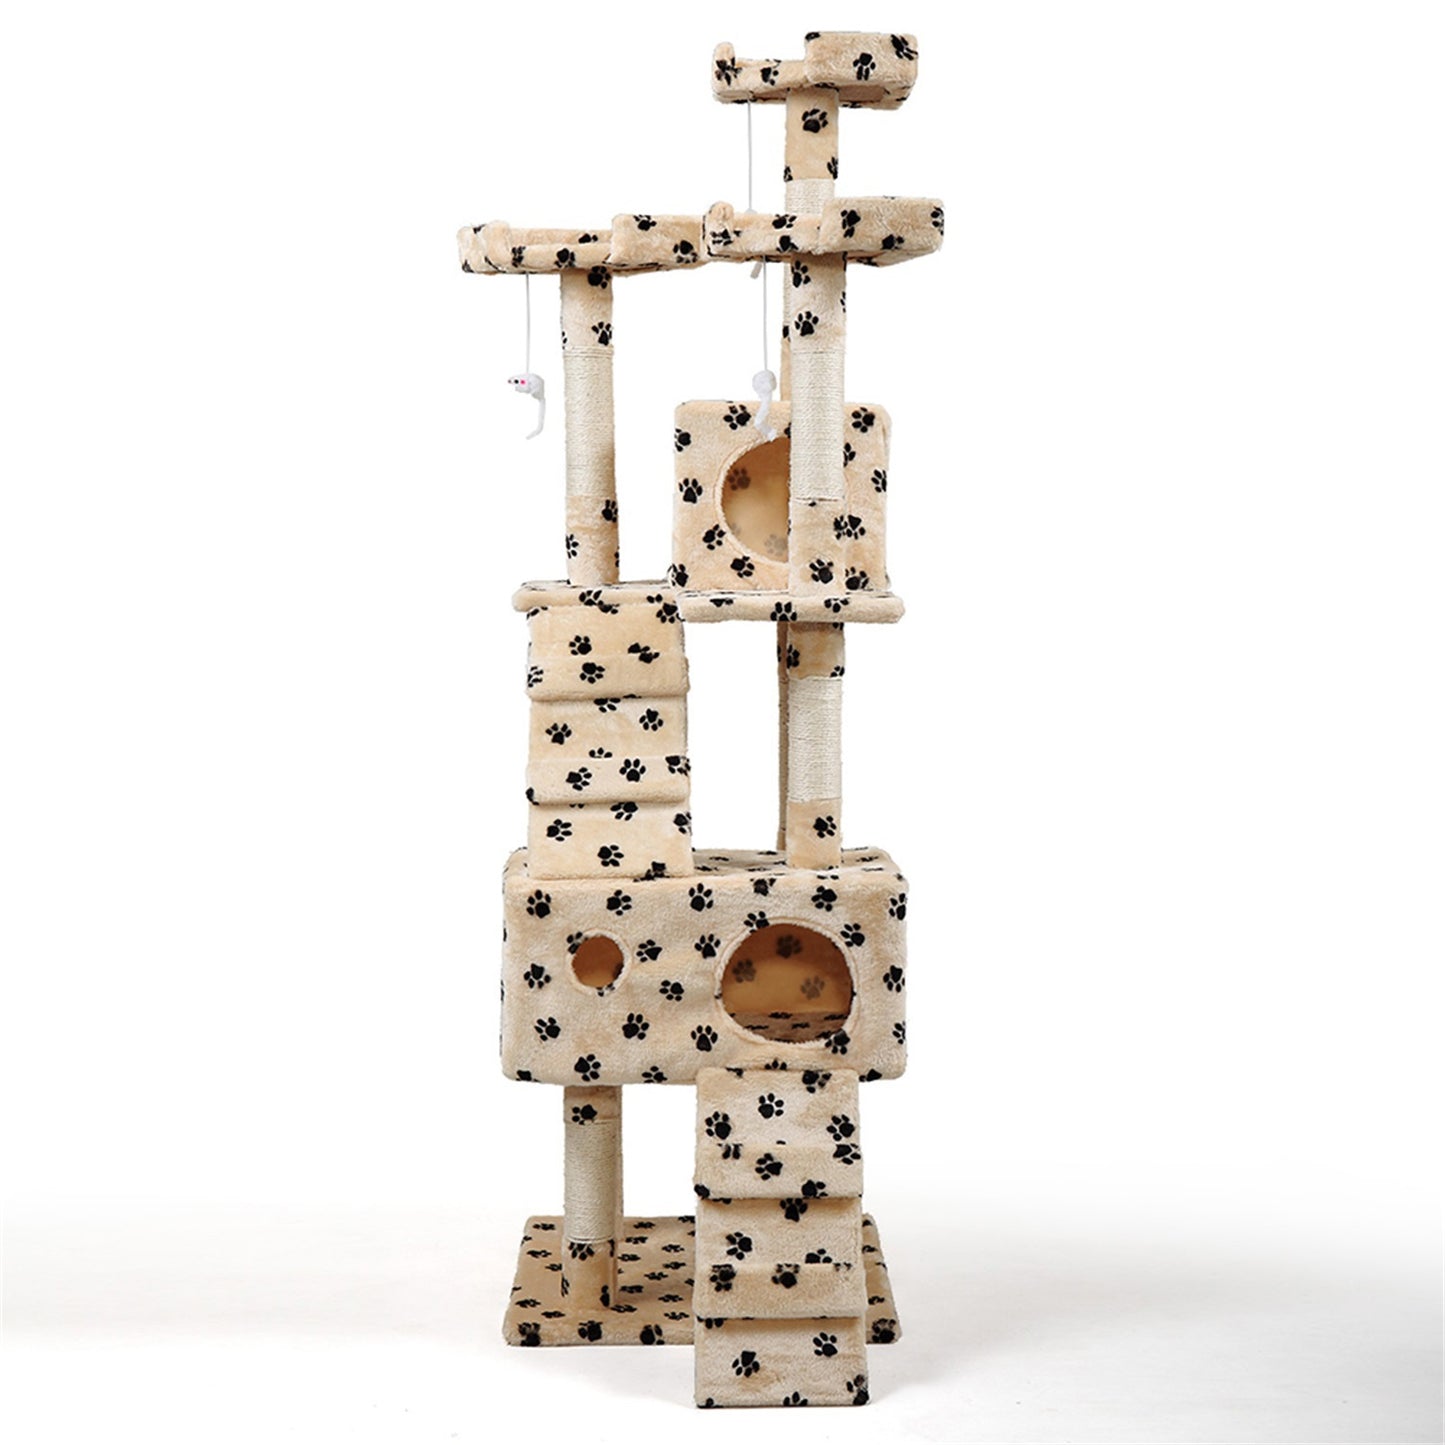 Pefilos Pet Furniture for Cats and Kittens - Cat Tower for Indoor Cats Tall Cat Tree for Big Cats Tiger Tough Cat Tree Tower Interactive Playground, Gray